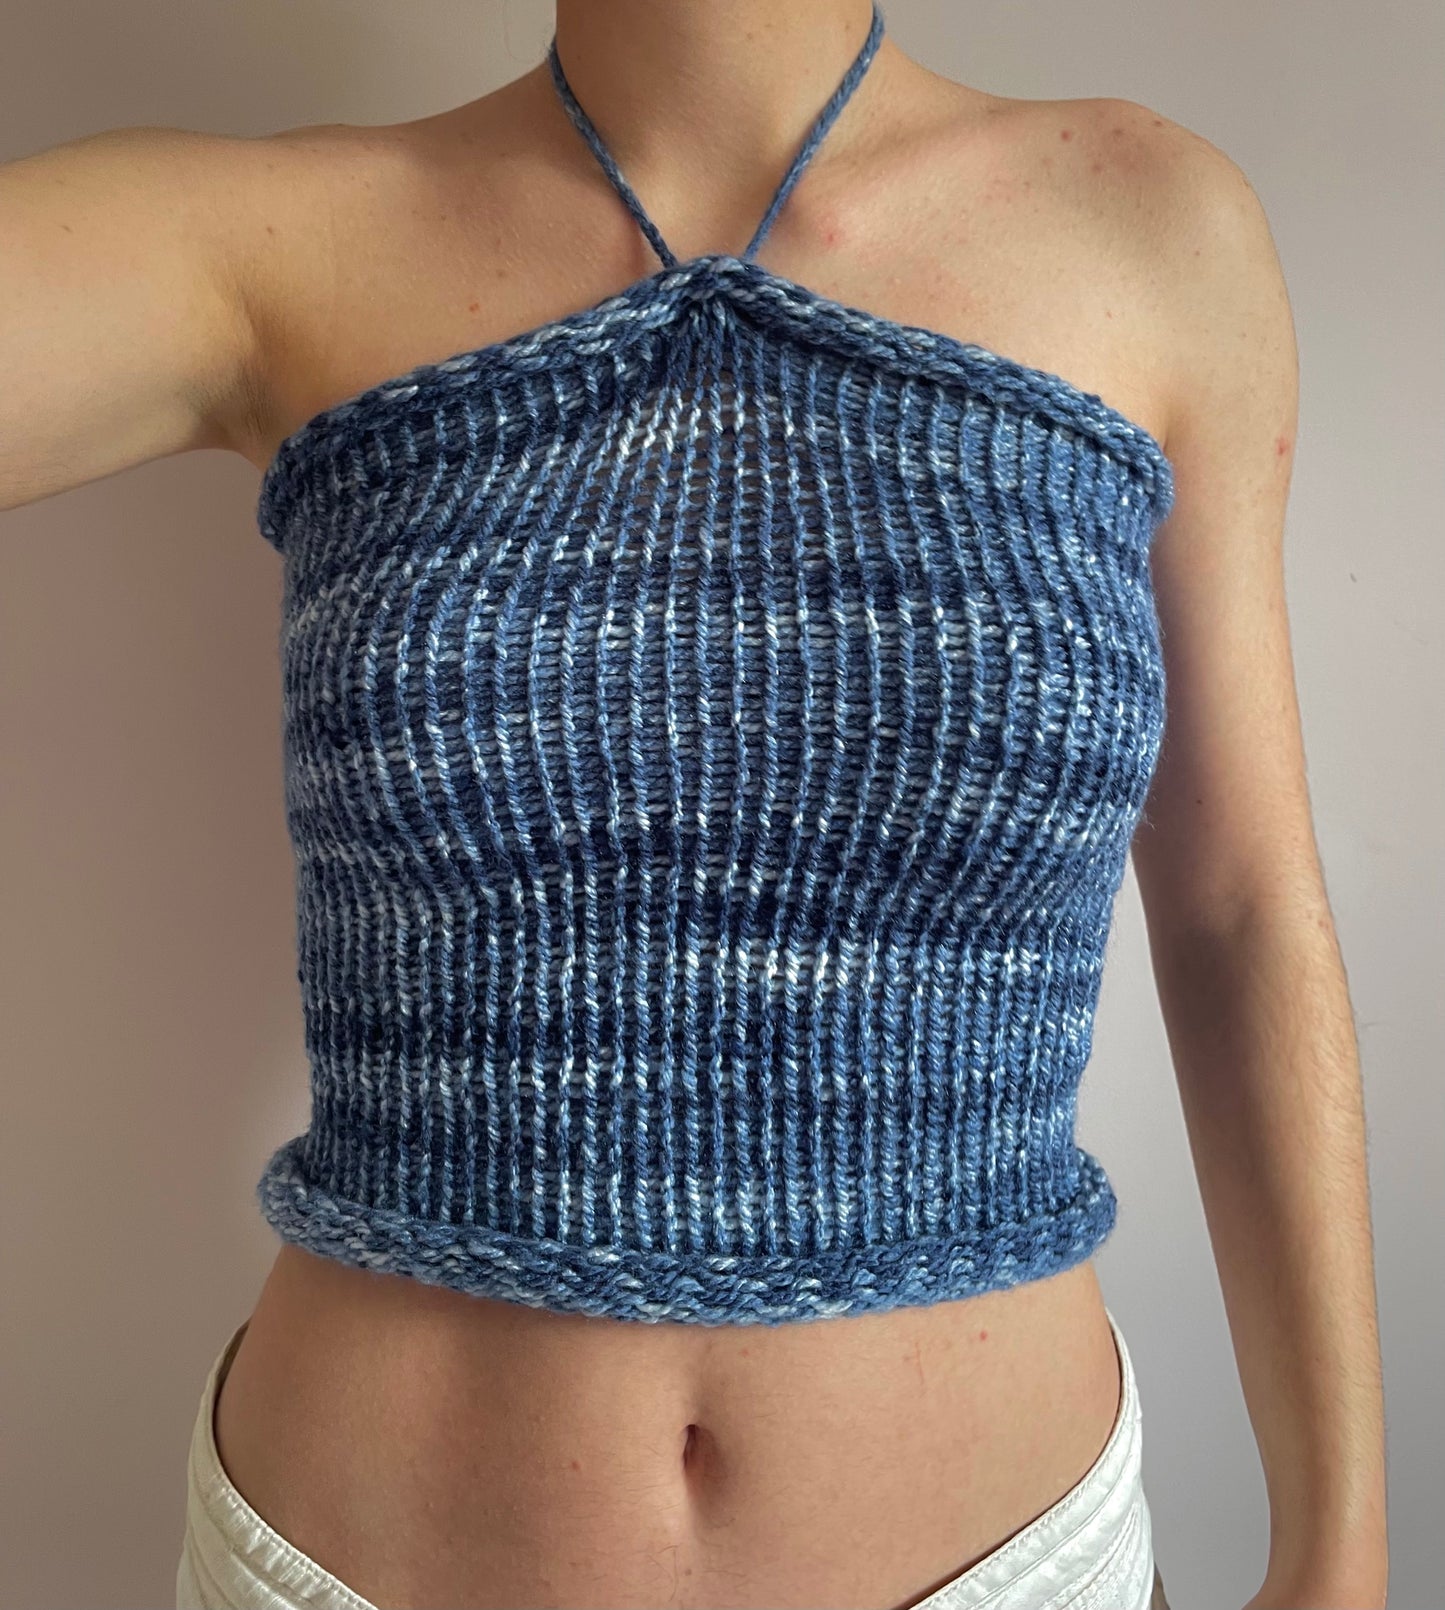 Handmade knitted halter top in blue and white